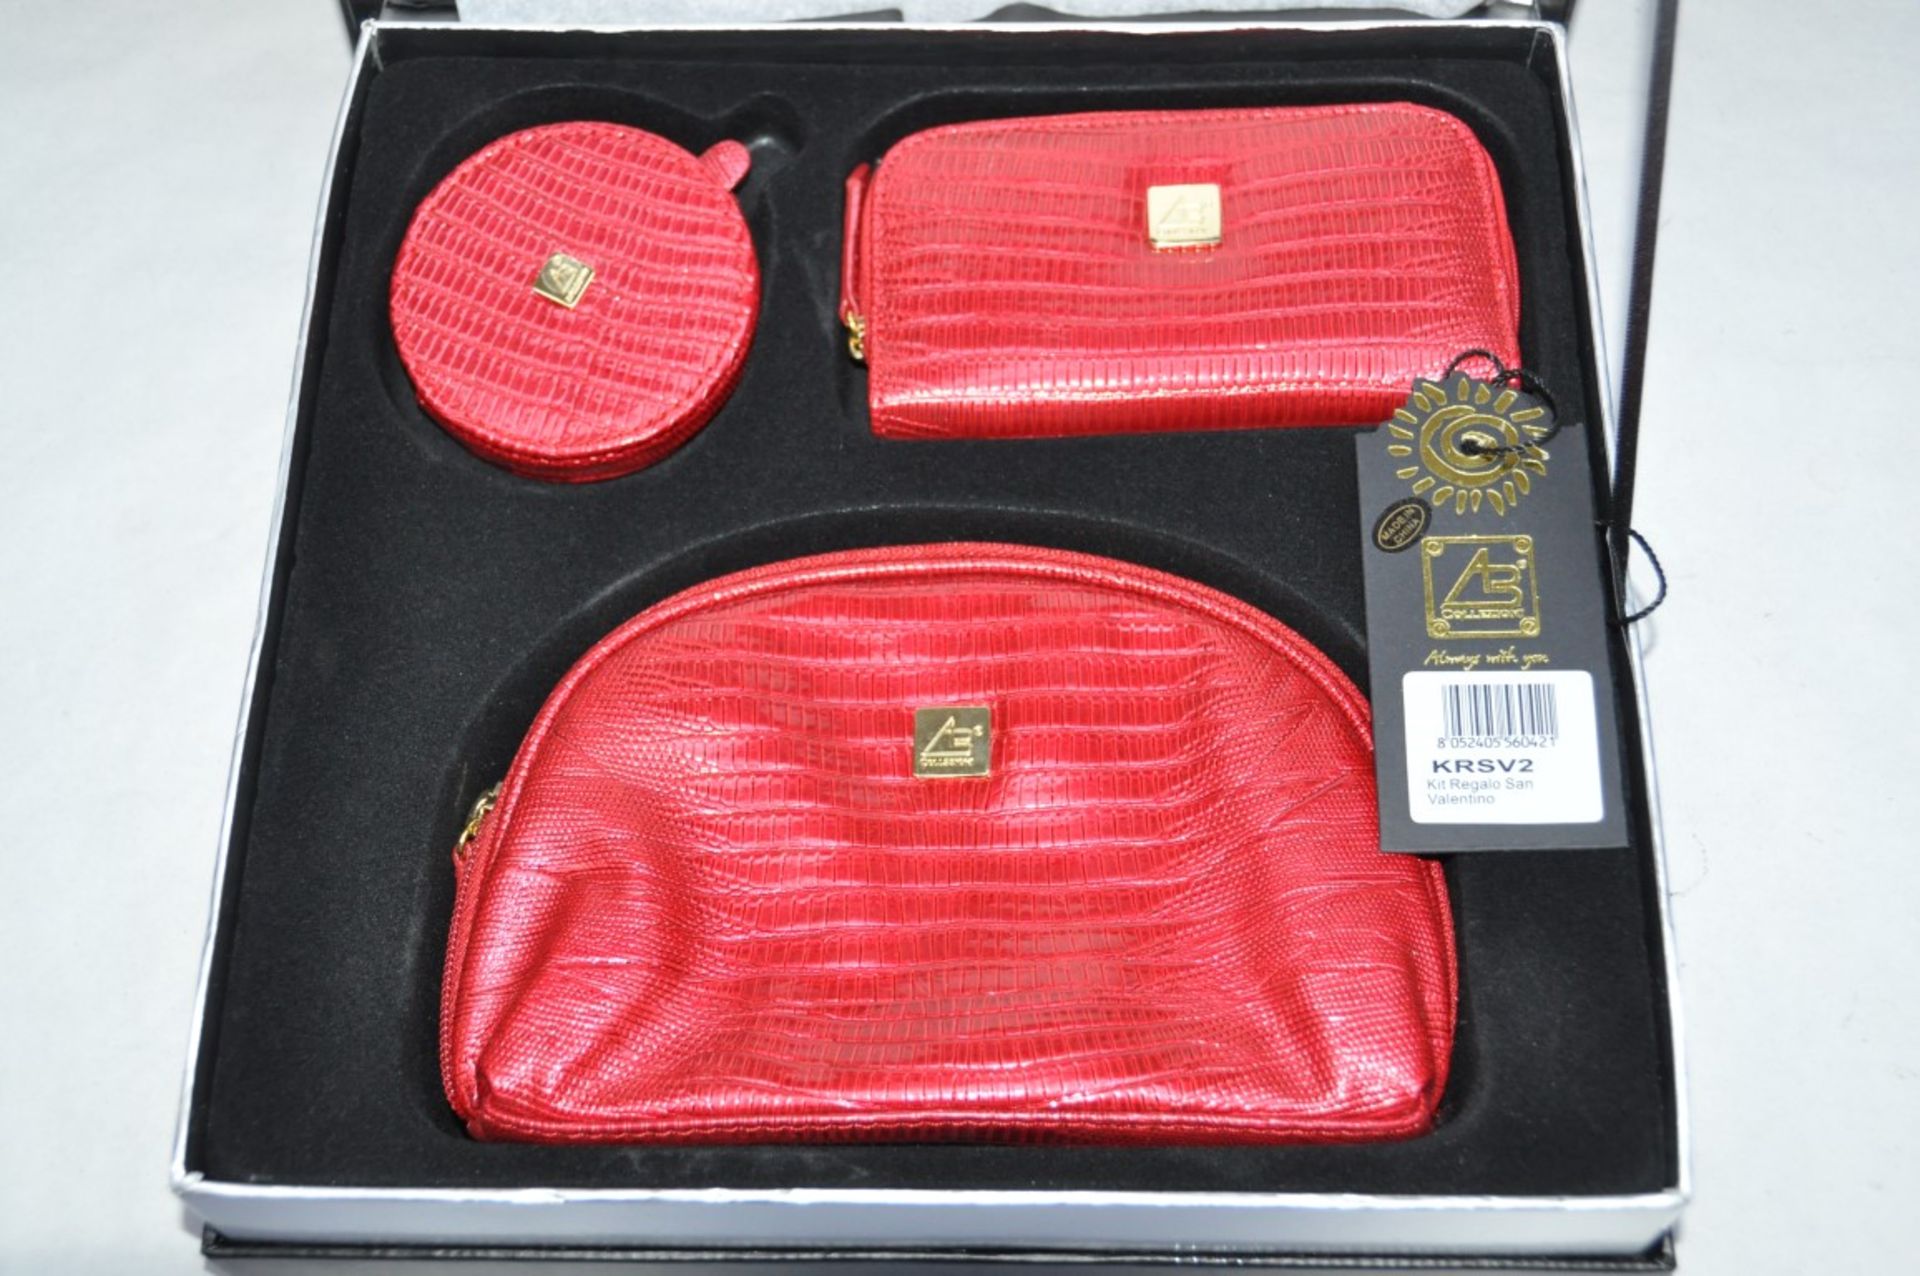 1 x "AB Collezioni" Italian Genuine Leather-Bound Luxury 3-Peice Travelling Vanity Set In Red ( - Image 2 of 6